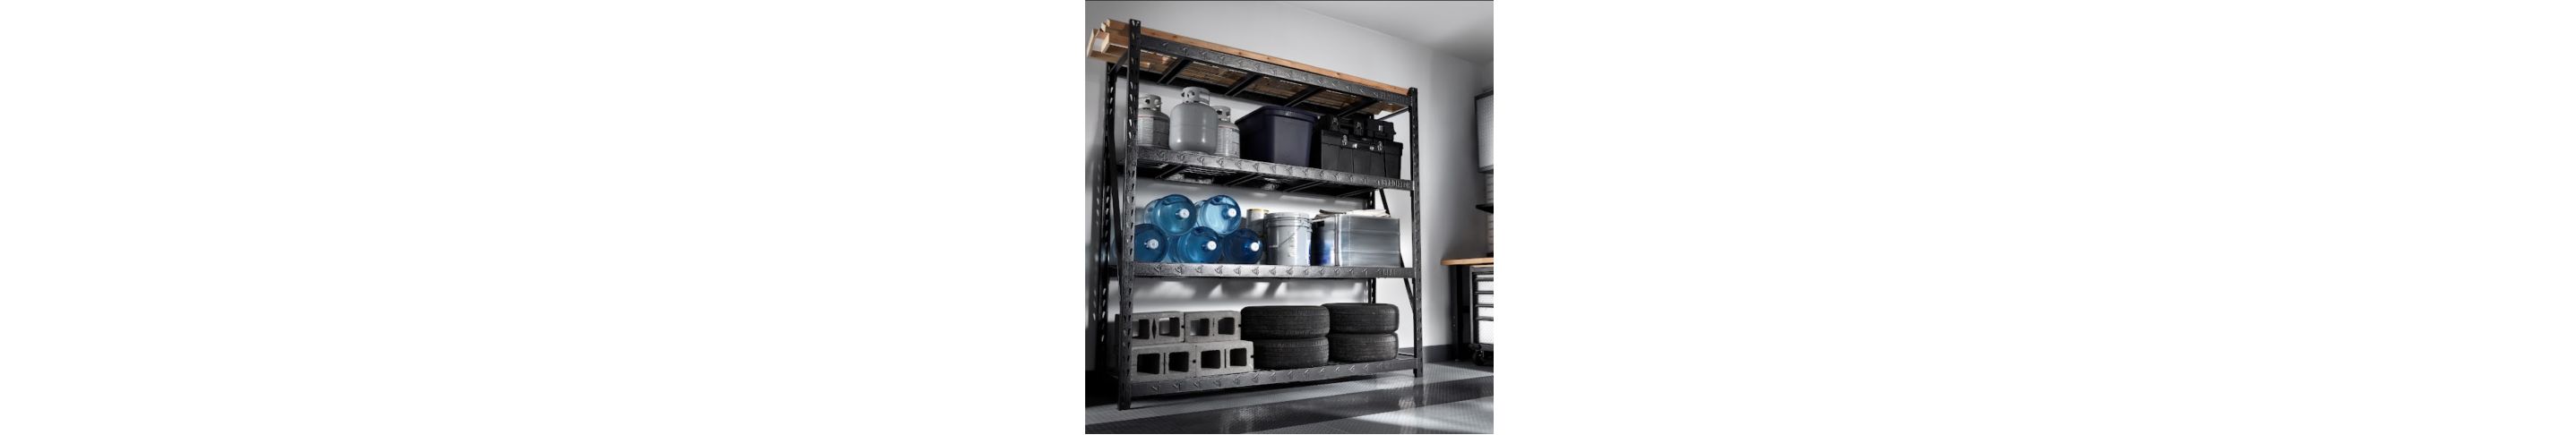 Rack Shelving with propane tanks and bins on the top shelf, water cooler jugs, a bucket and a bin on the middle shelf and cinder blocks and tires on the bottom shelf